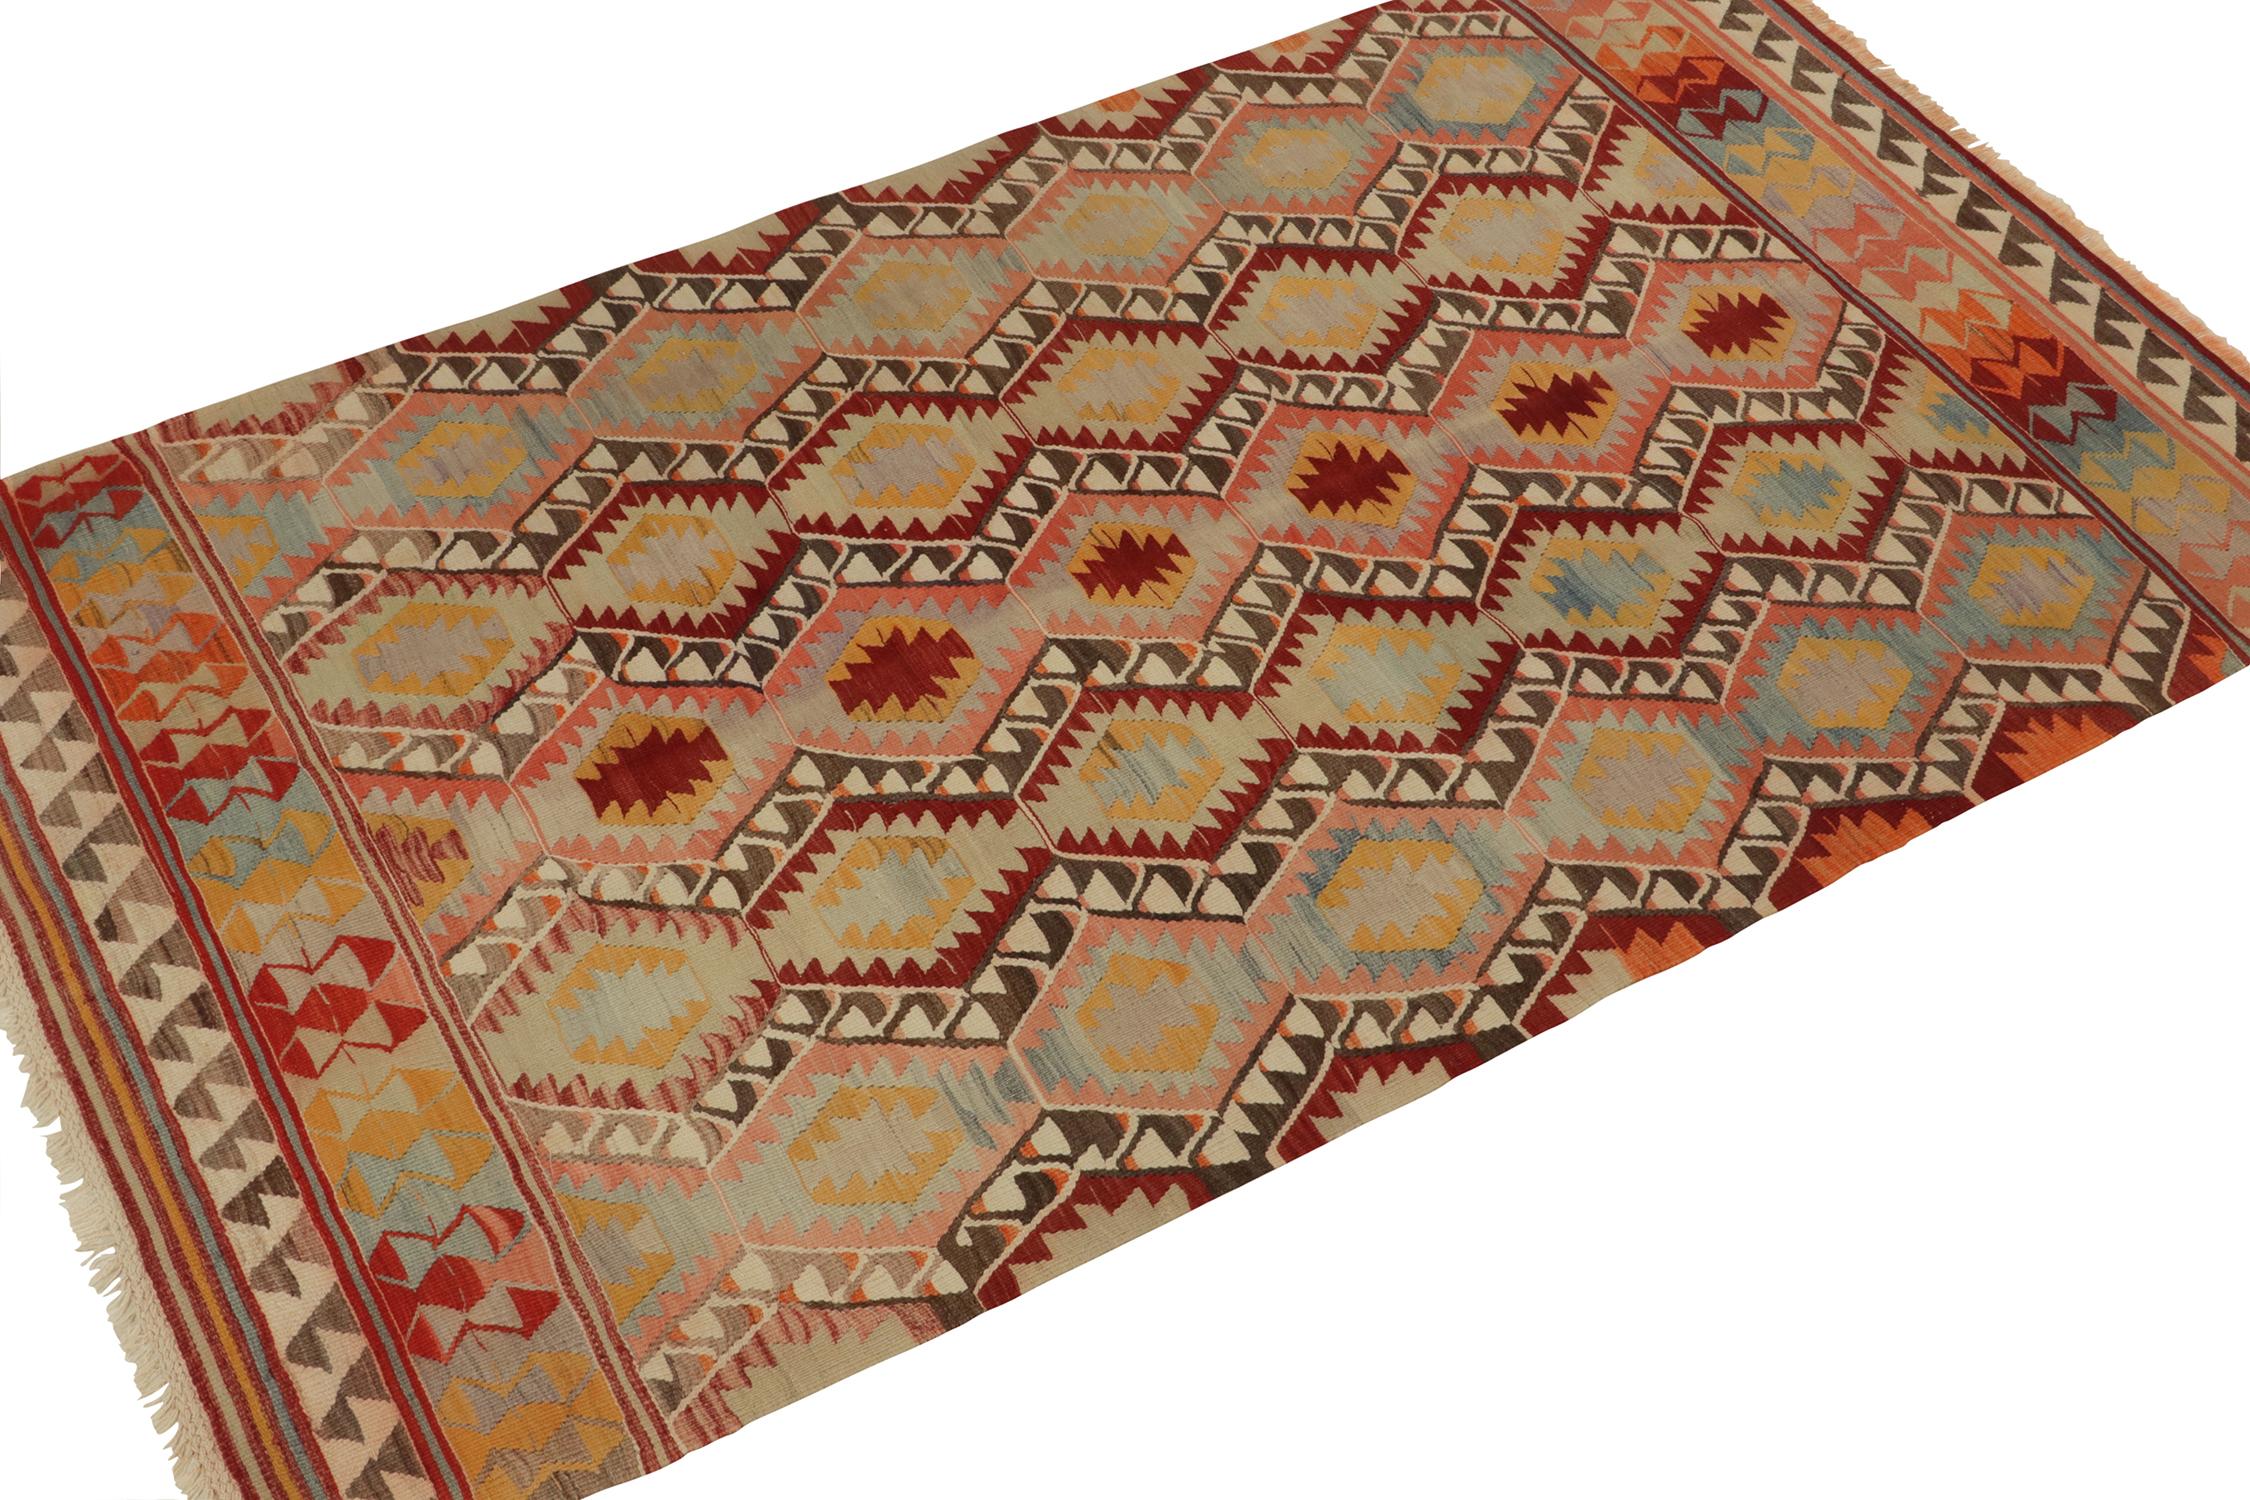 Originating from Turkey circa 1960s, a vintage tribal kilim rug capturing a playful & modern attitude for mid-century works. 

Handwoven in wool, the piece enjoys tribal patterns vibrant red, beige & gold among a polychromatic colorway. Keen eyes